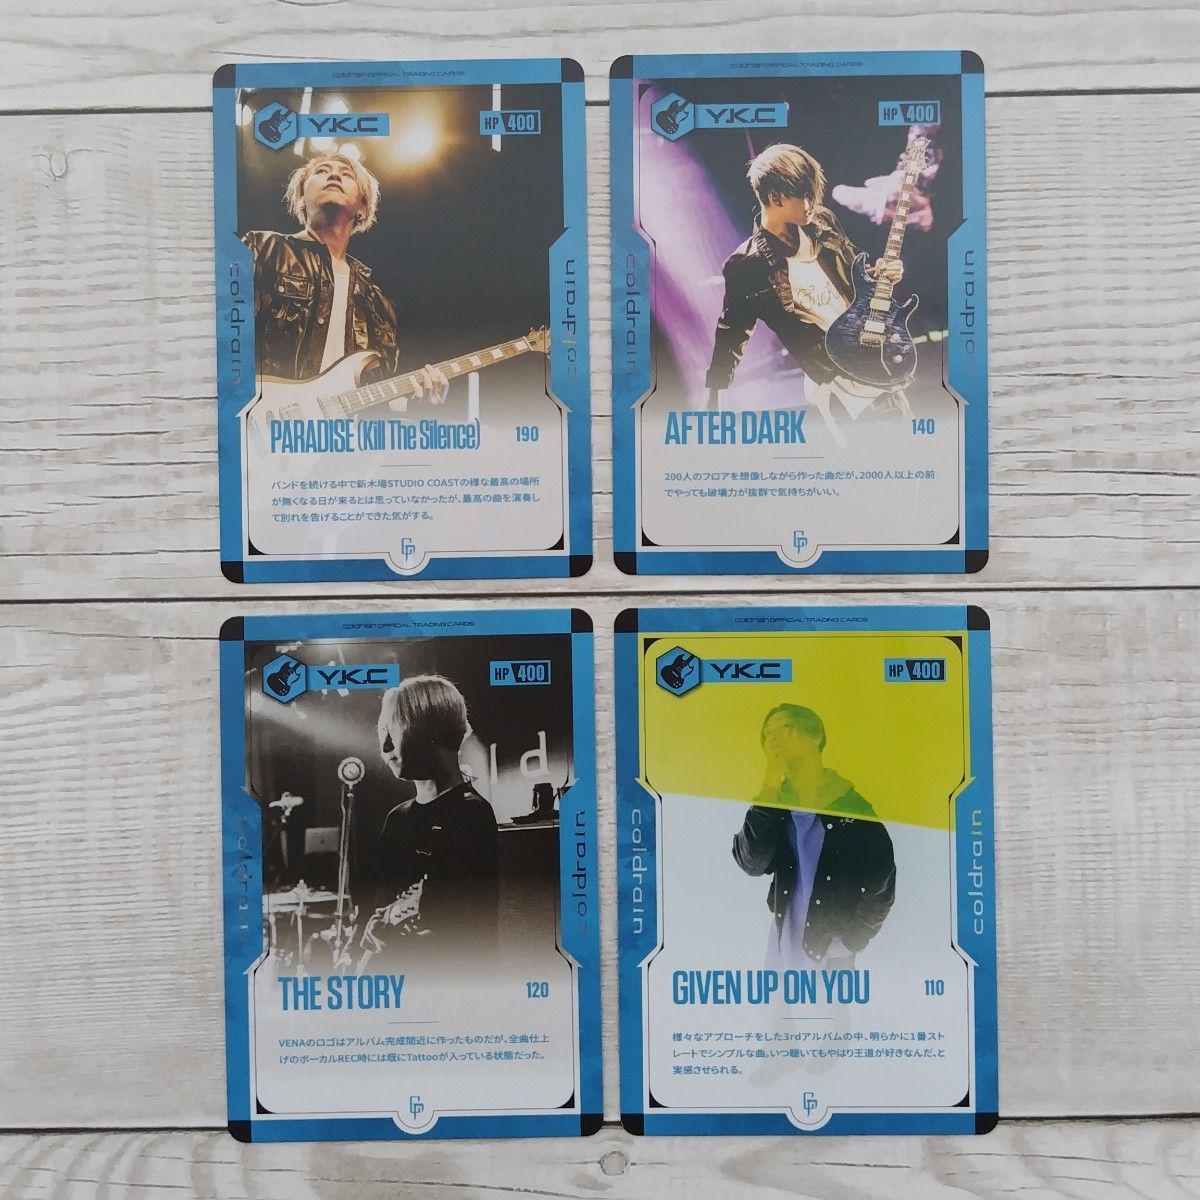 coldrain OFFICIAL TRADING CARDS（Y.K.C）